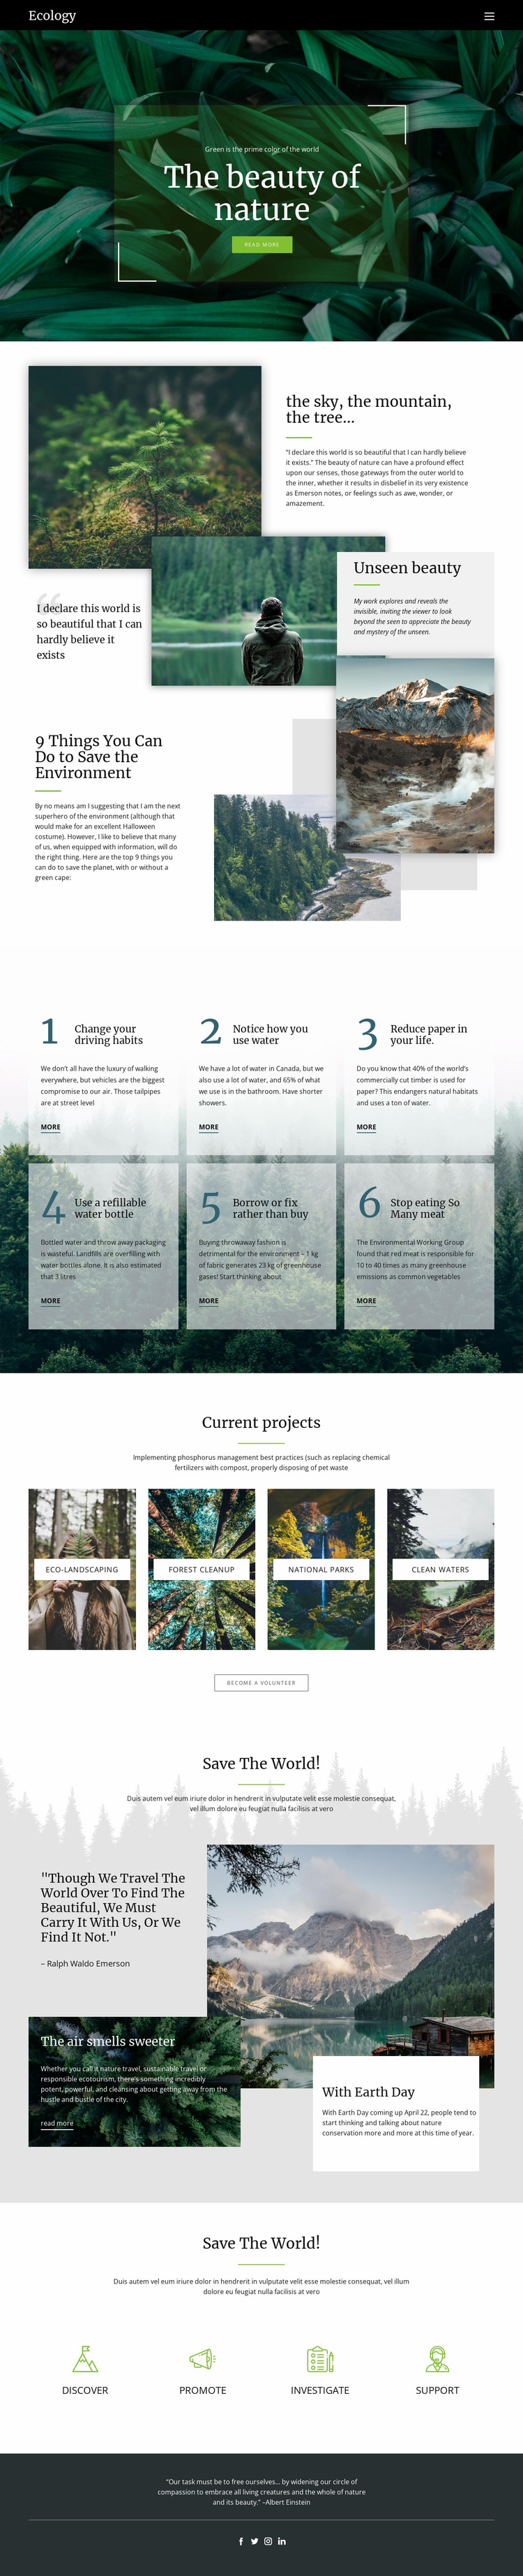 Skies and beauty of nature Website Mockup